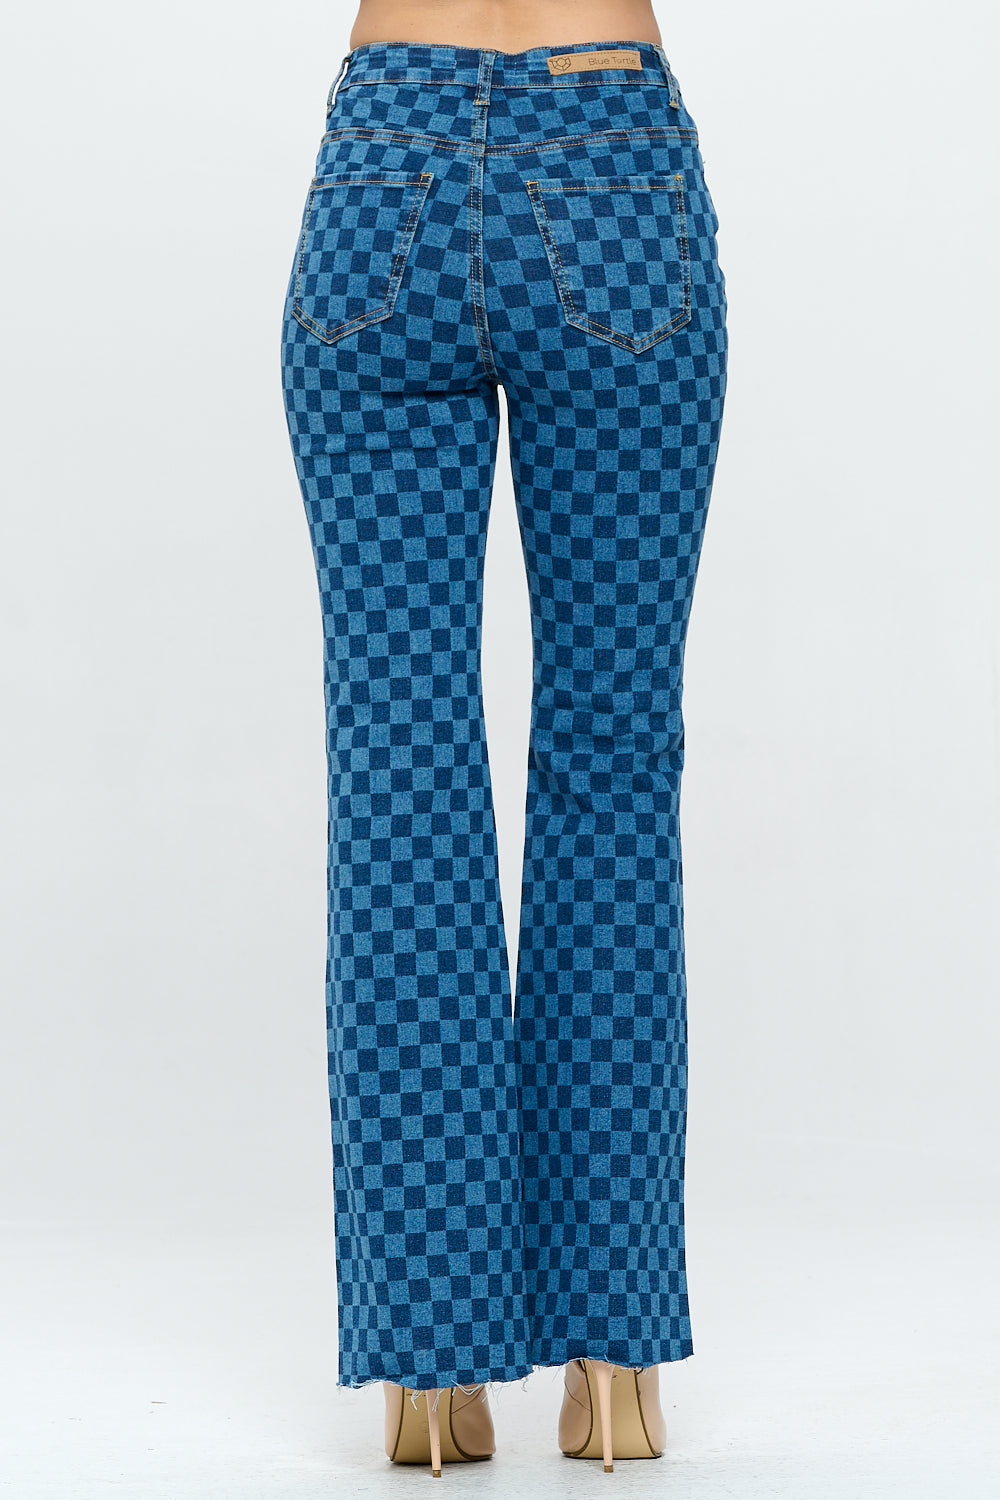 Extreme Stretch Checkered High Waist Flare Jeans YH2209